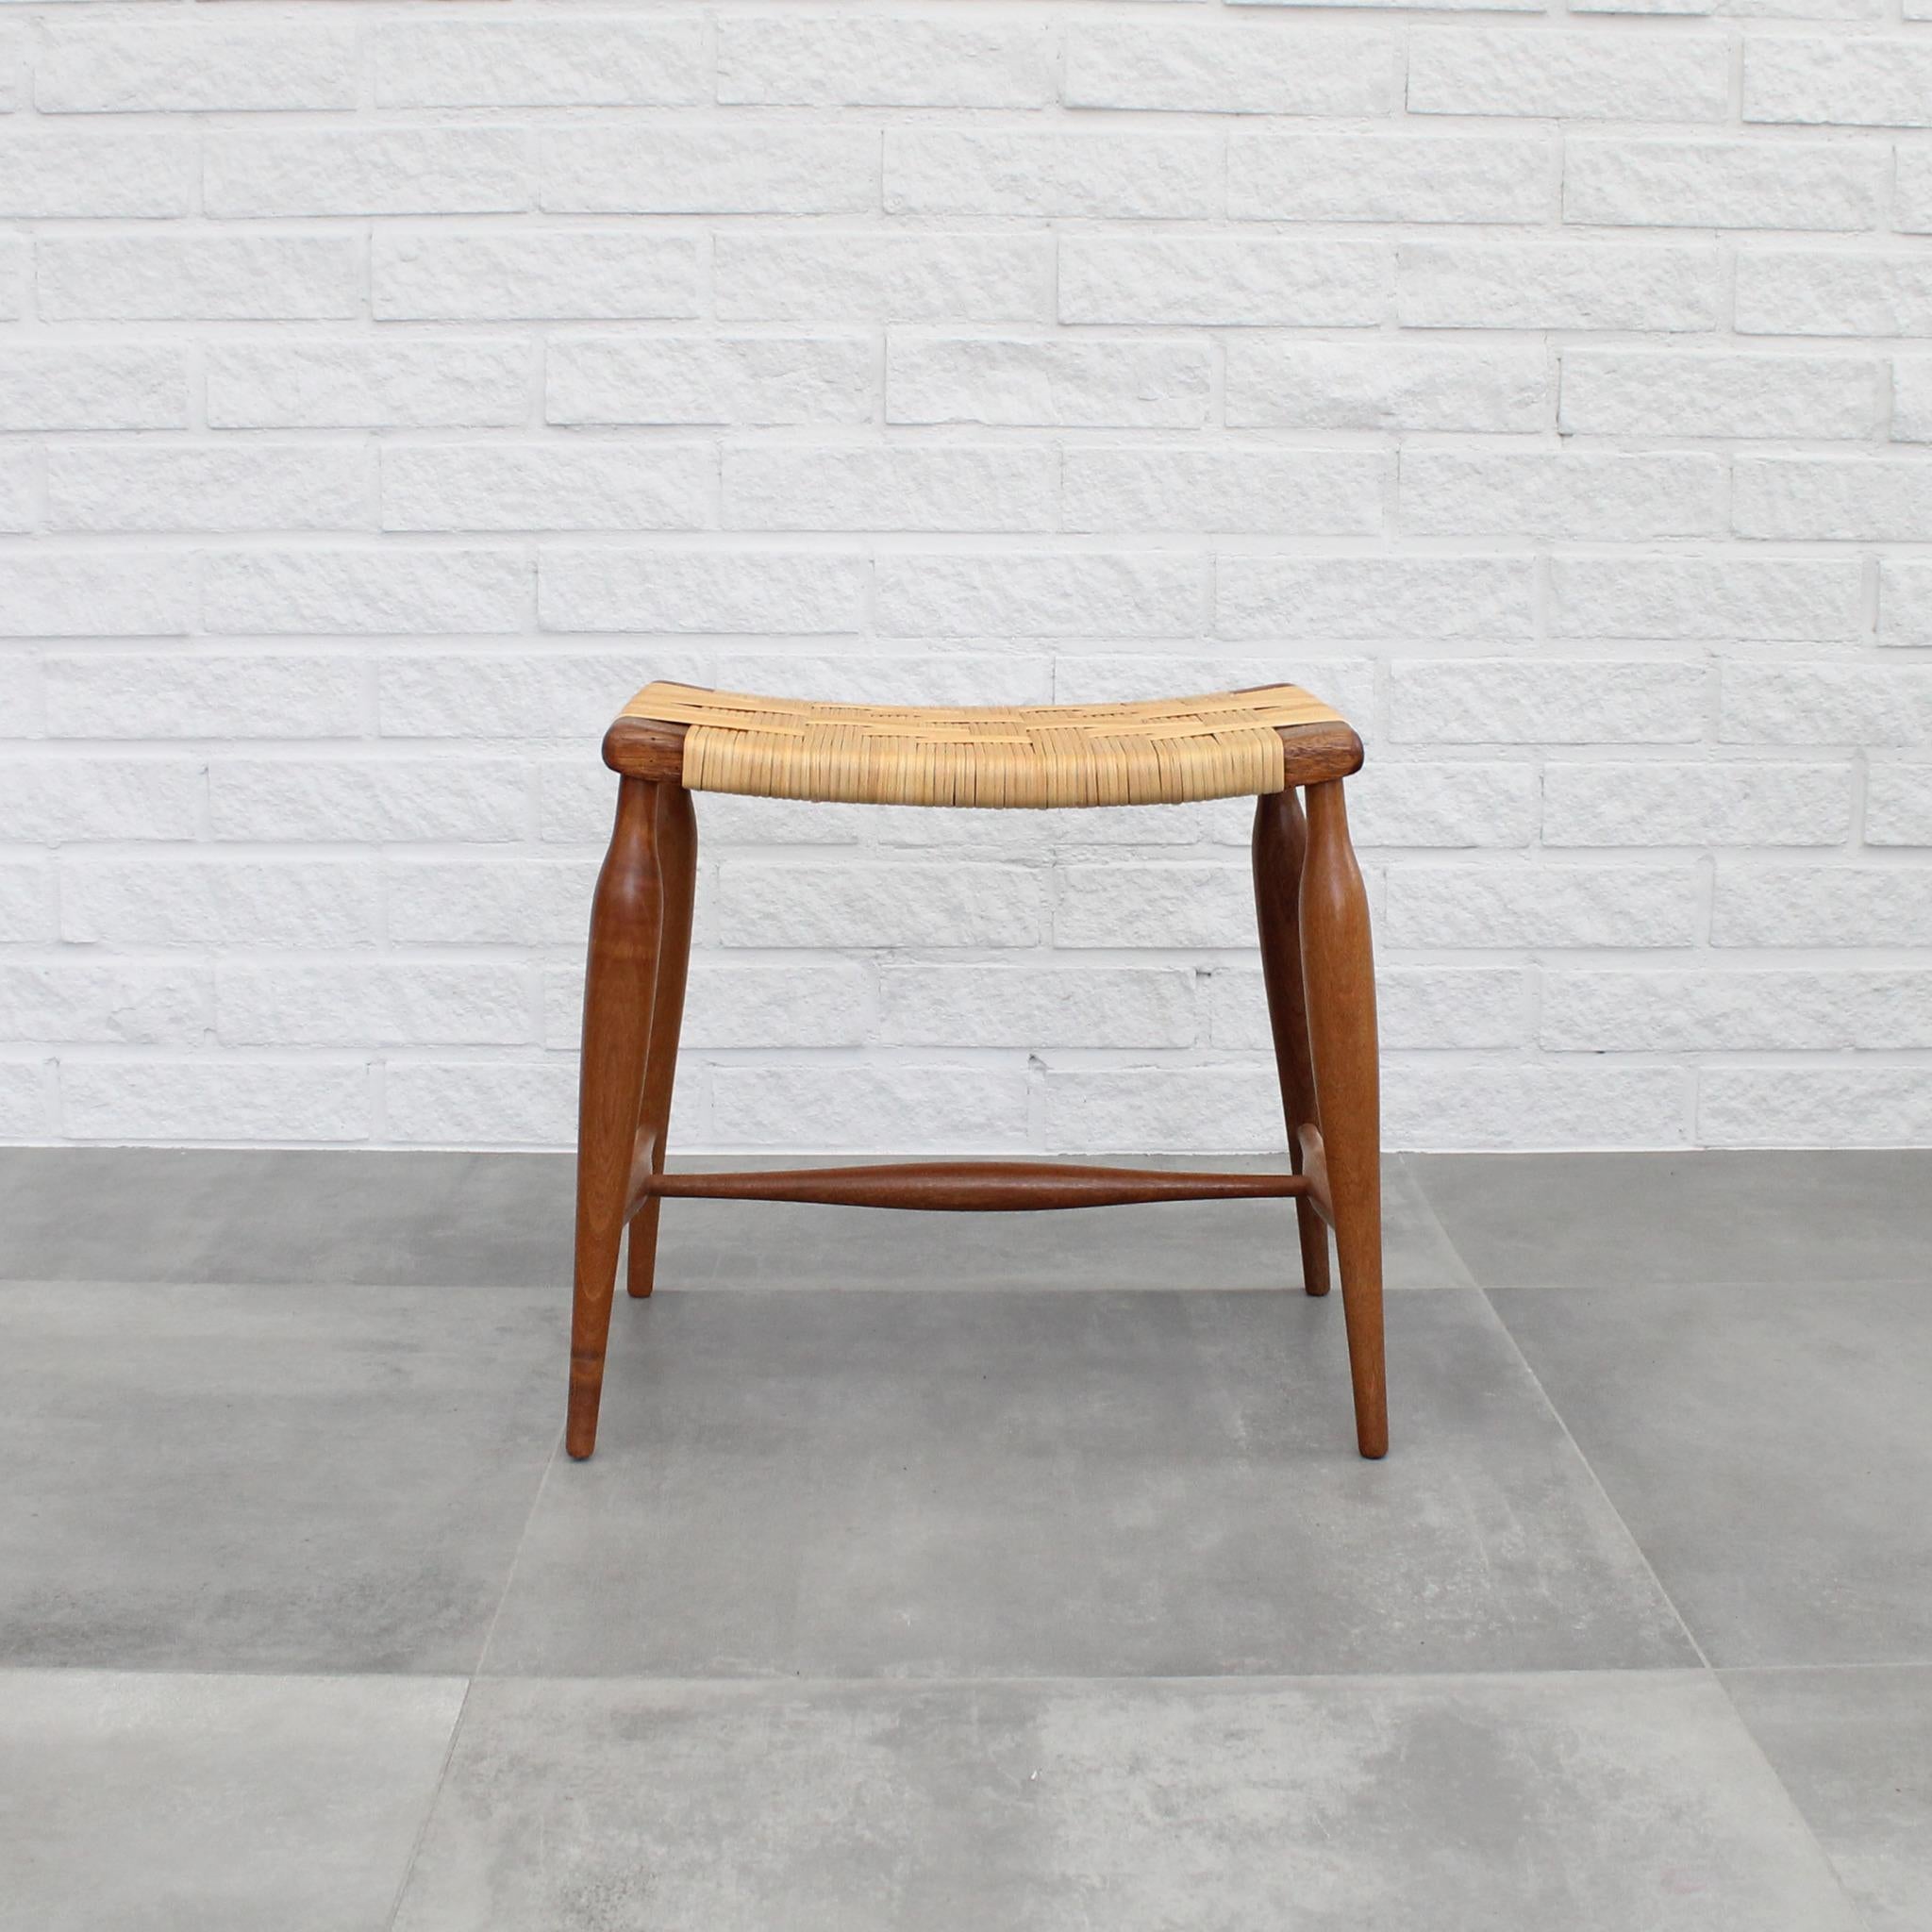 Early version of Stool 967, originally designed by Josef Frank in 1938 for Firma Svenskt Tenn. Crafted from solid mahogany with a rattan seat, this model bears a striking resemblance to the standard 967, differing primarily in the shape of the seat